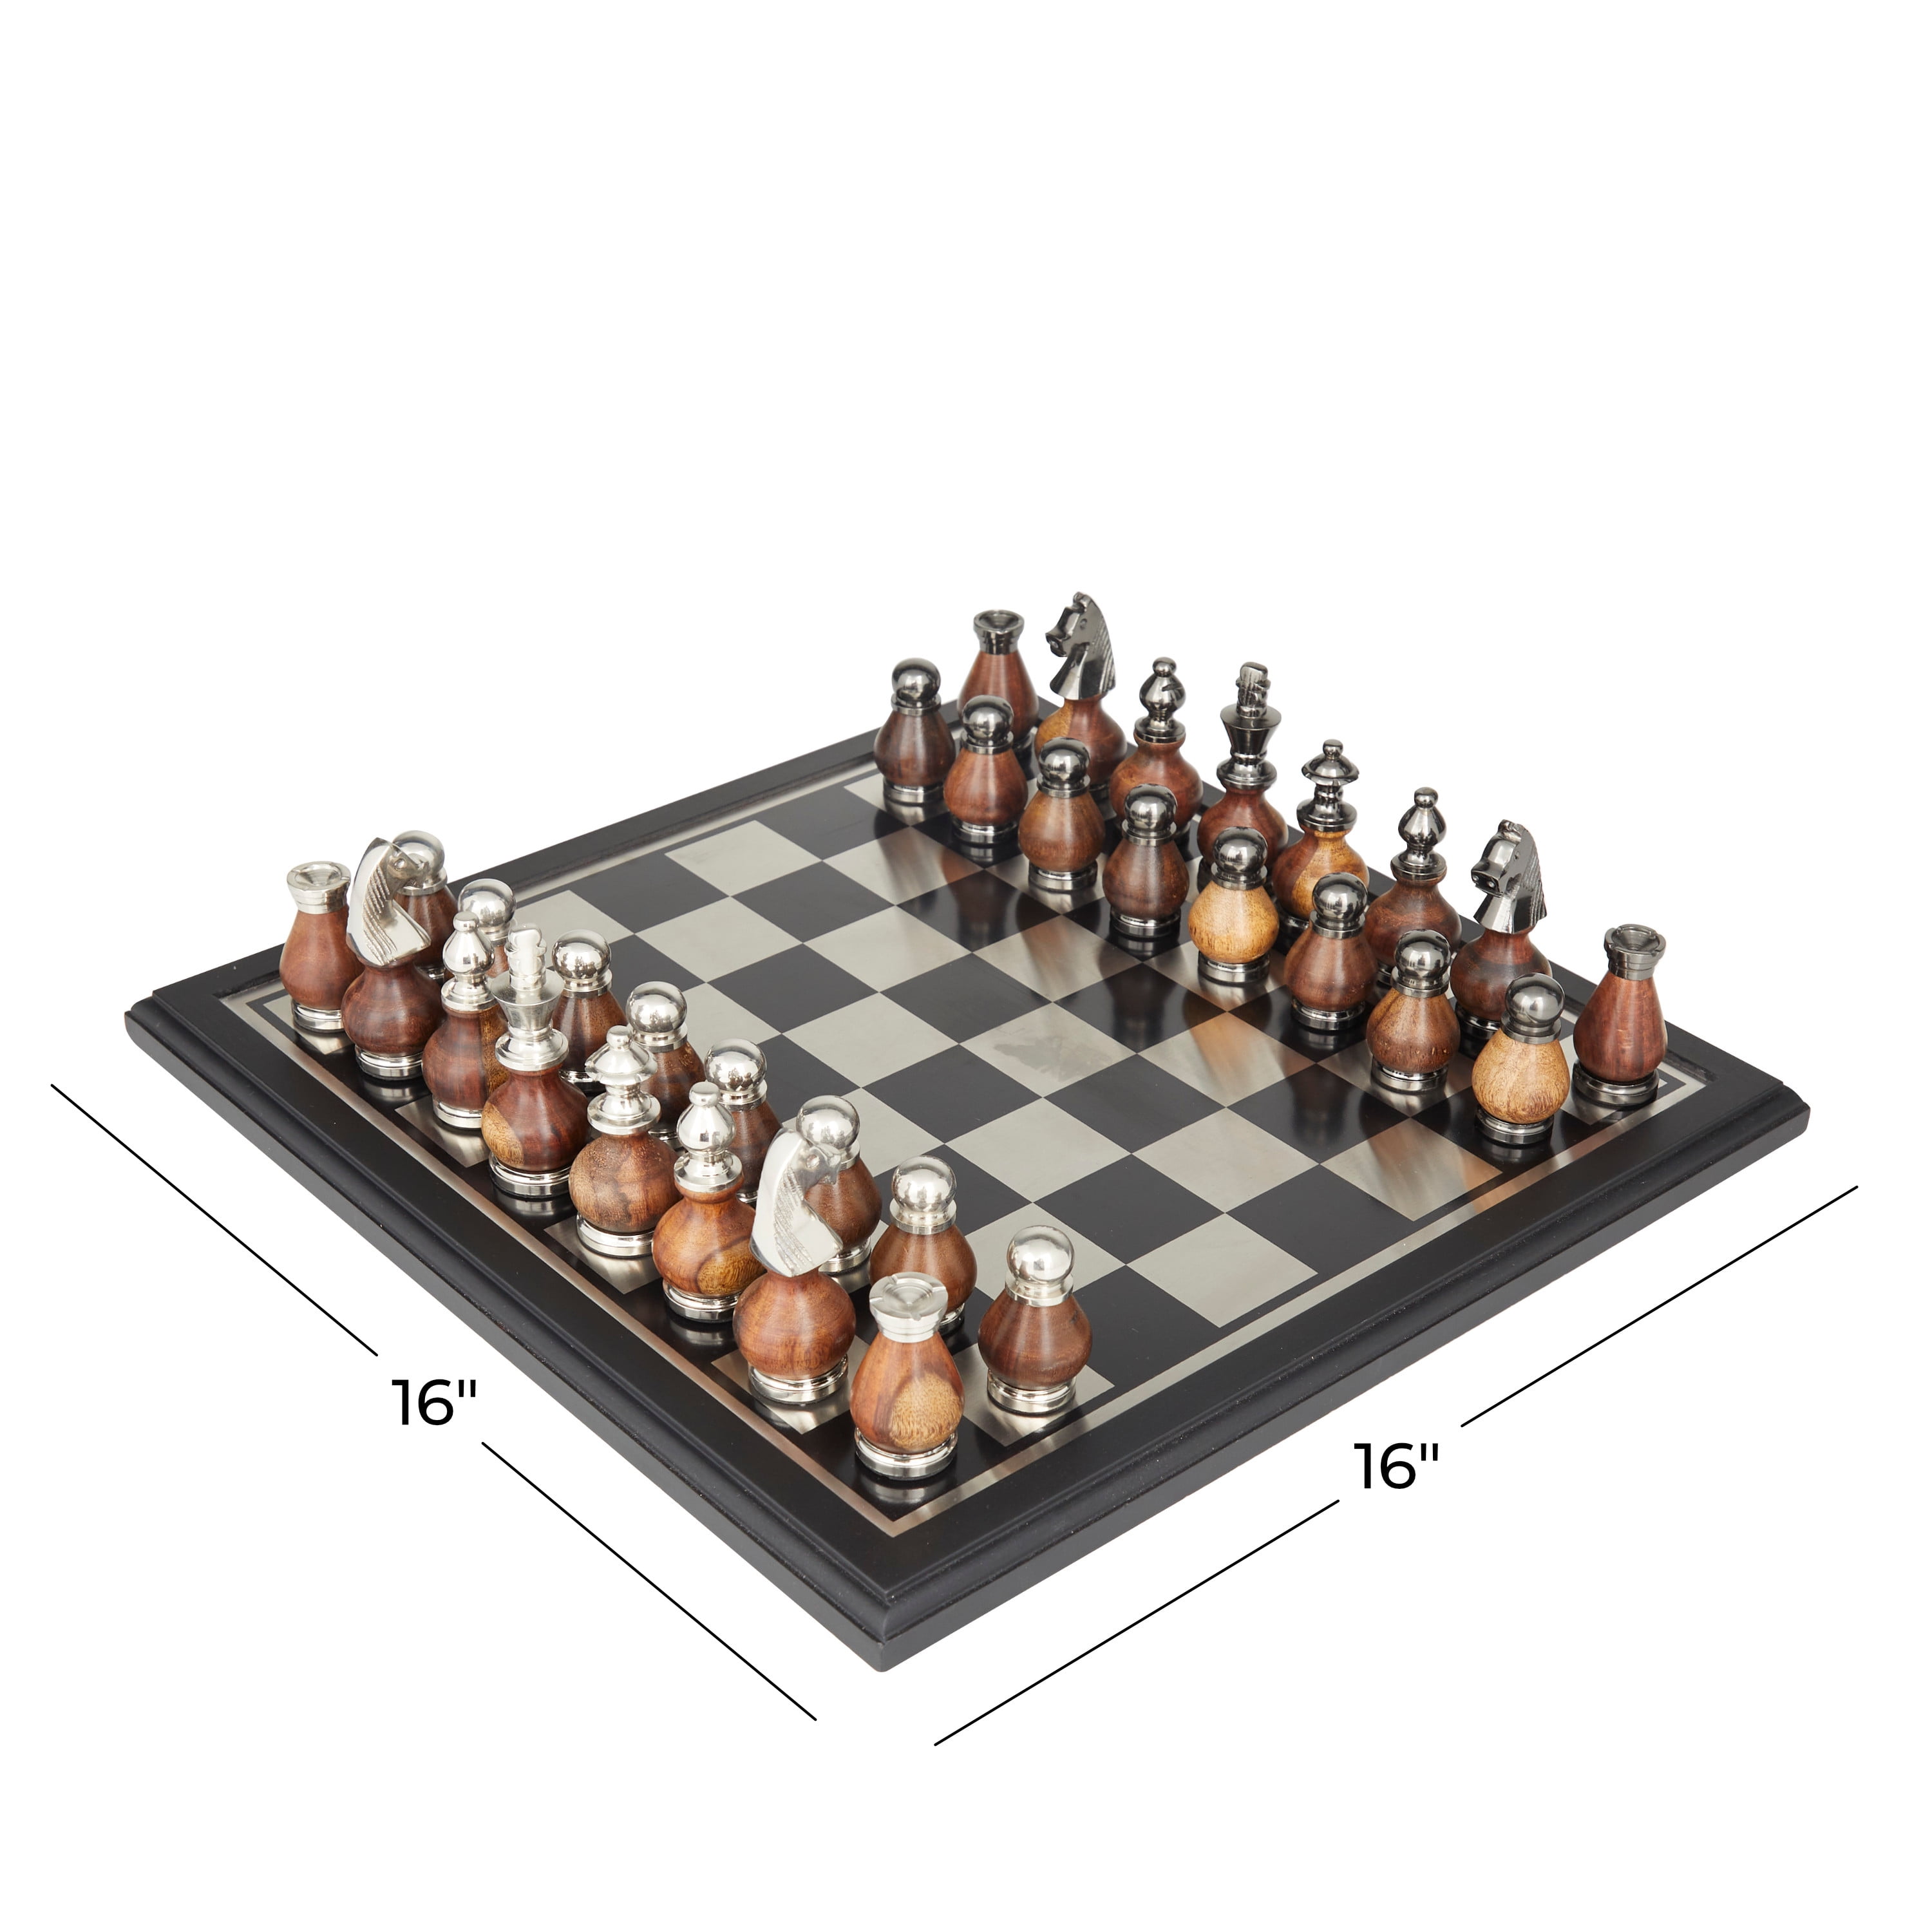  free online multiplayer chess games community